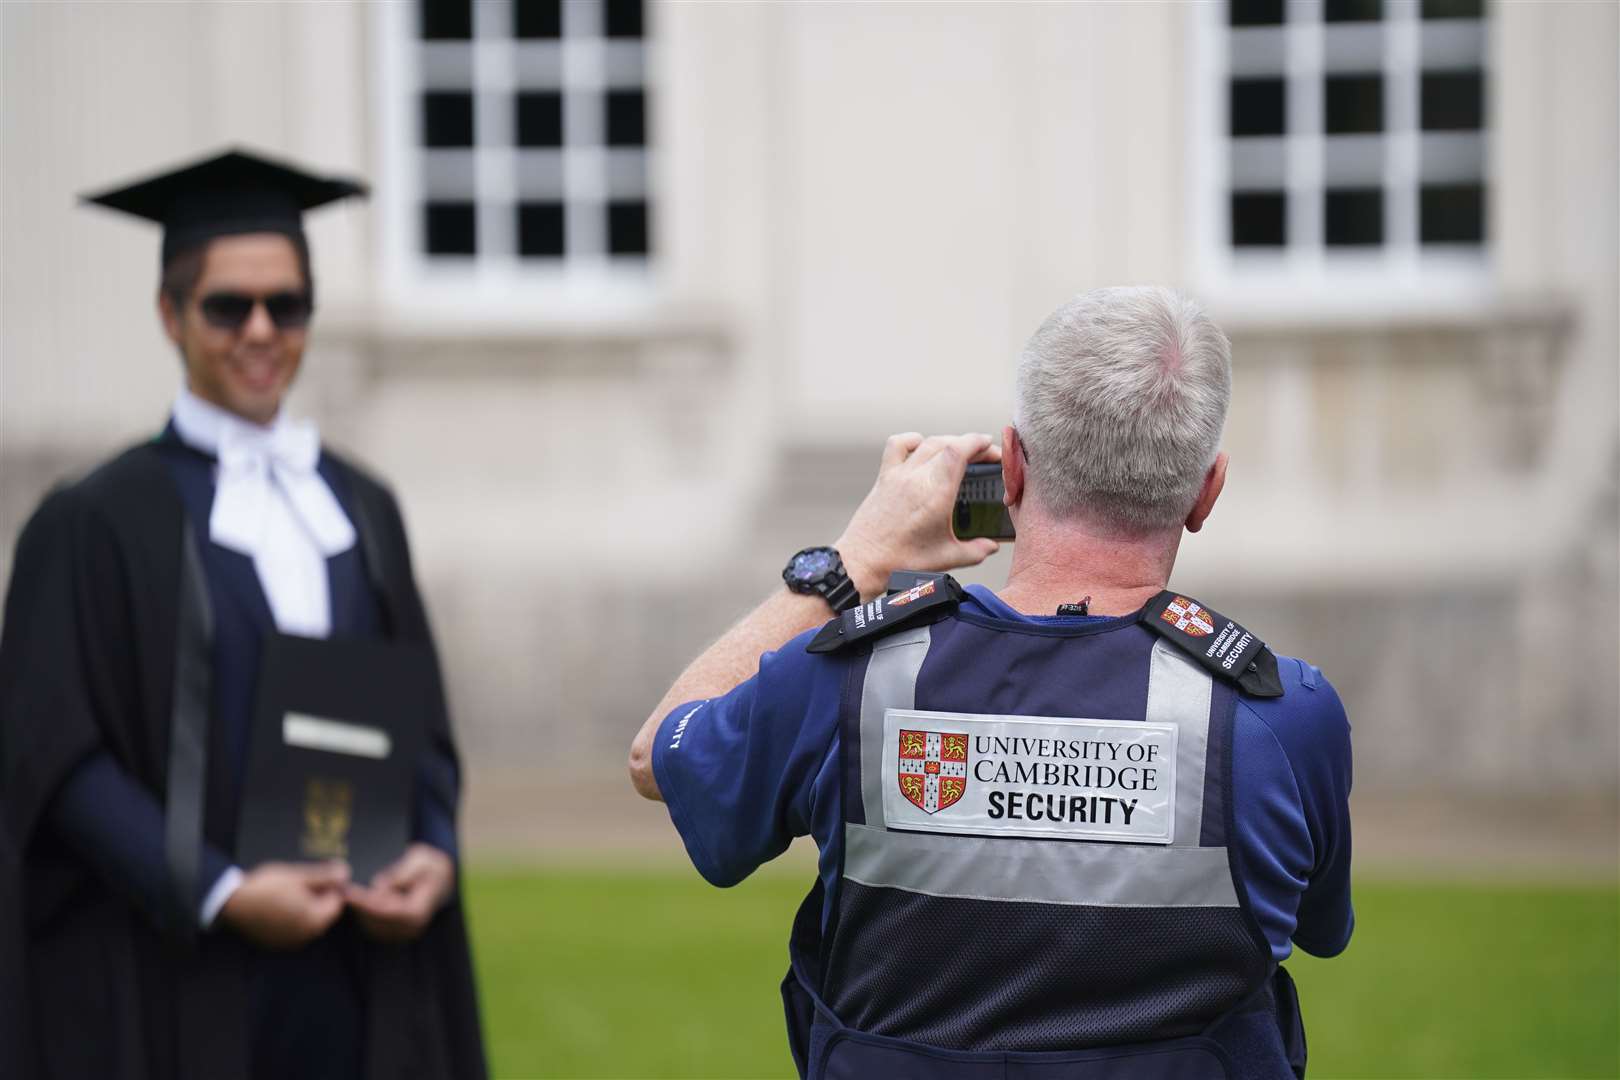 Security officers allowed new graduates into the yard at Senate House for photographs after the protesters left (Joe Giddens/ PA)